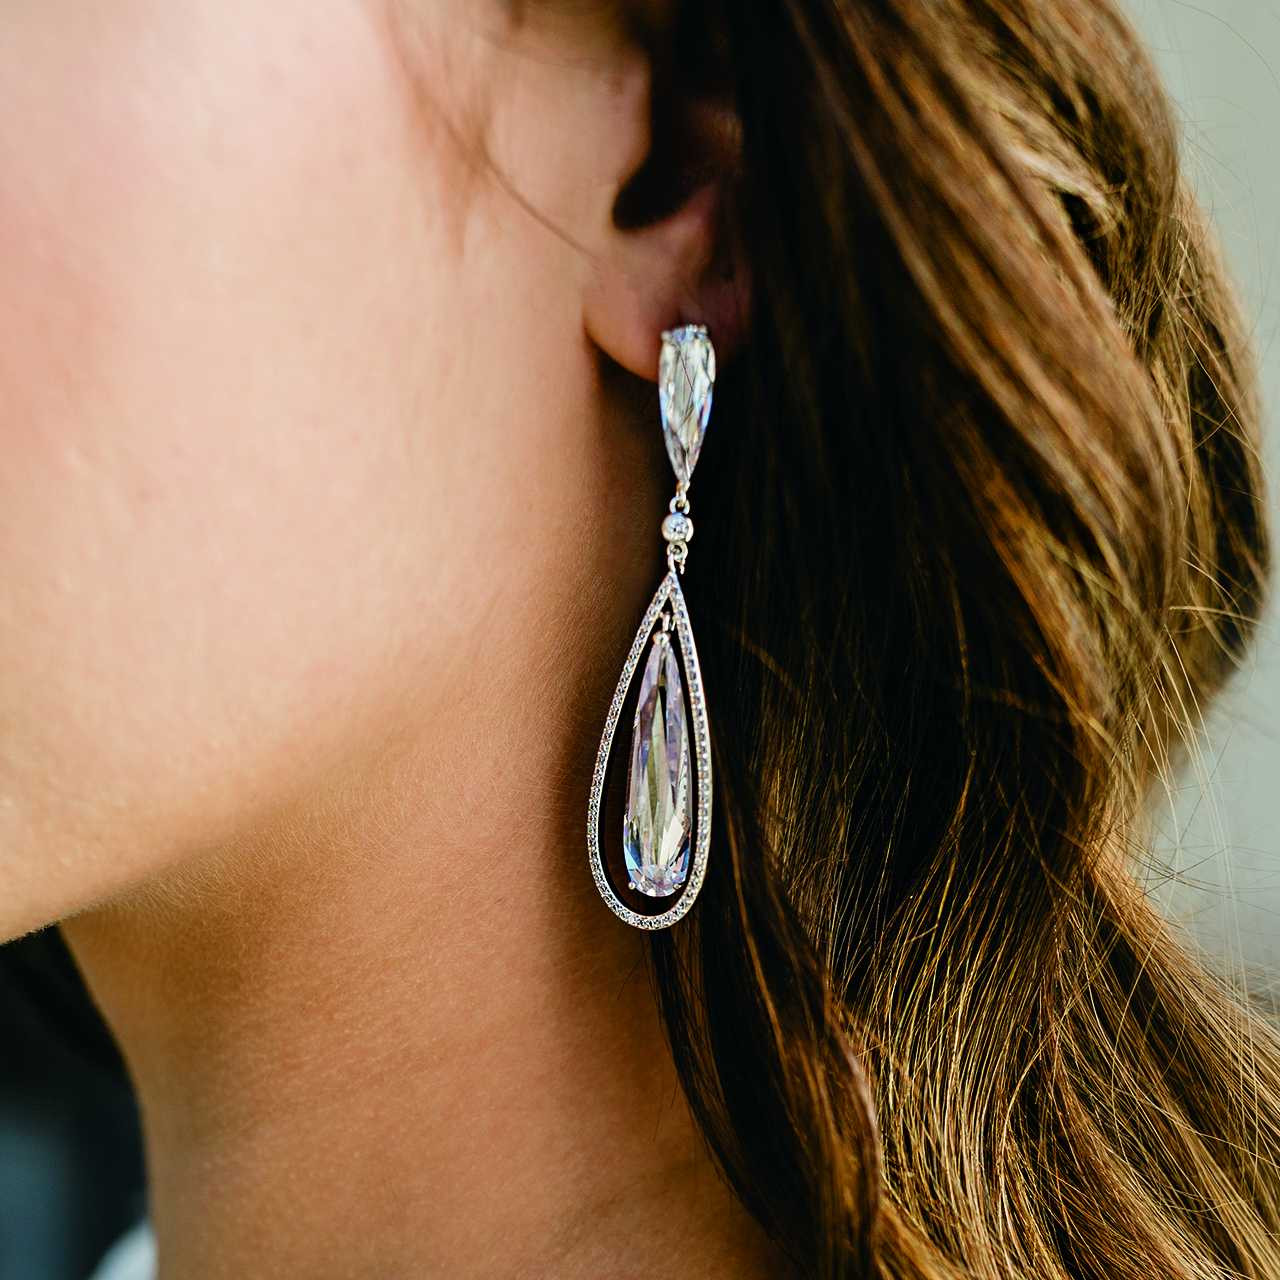 Discover more than 236 formal statement earrings